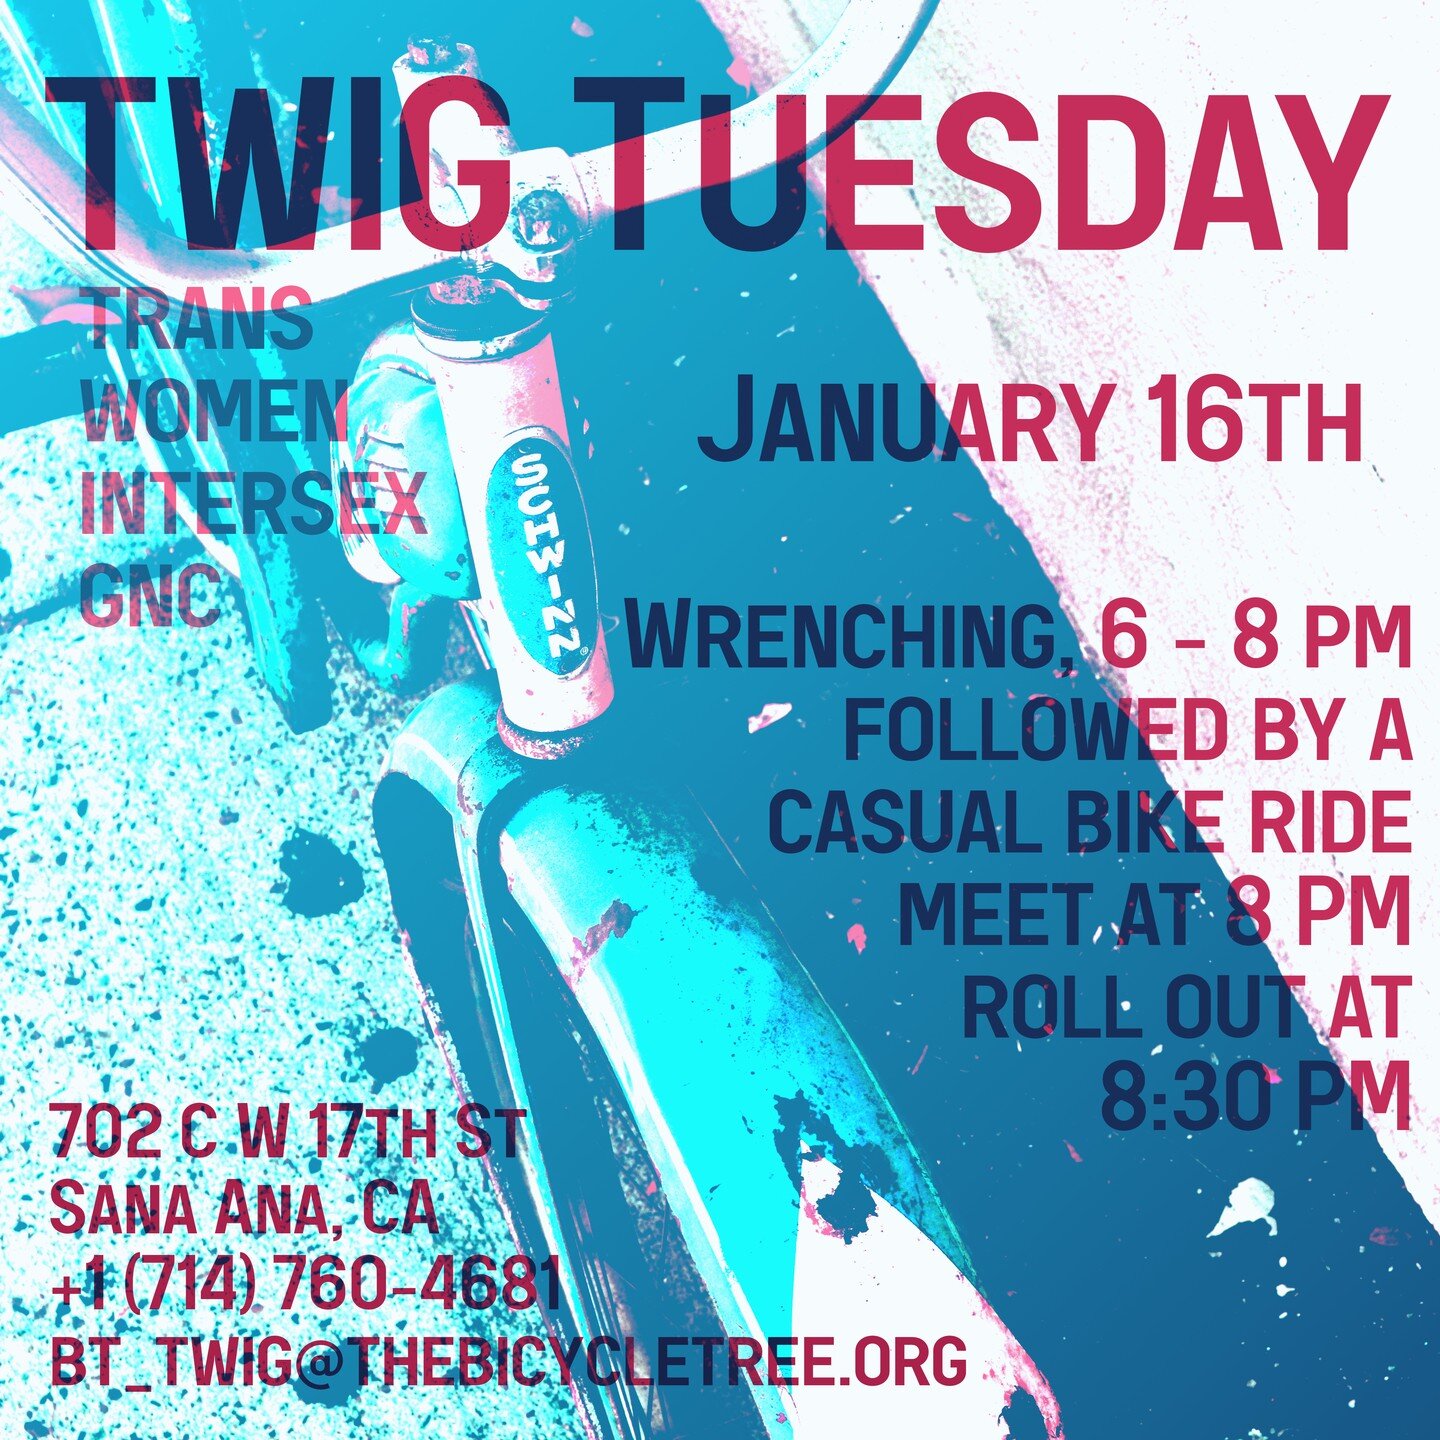 It's the 3rd Tuesday, so that means it's wrenching hours tonight 6 - 8 pm at the shop! First one of 2024! Whoohoo!!!

We'll be closing the night out with a casual-pace bike ride, rolling out at 8:30. (We're hoping to make this a regular thing now...)